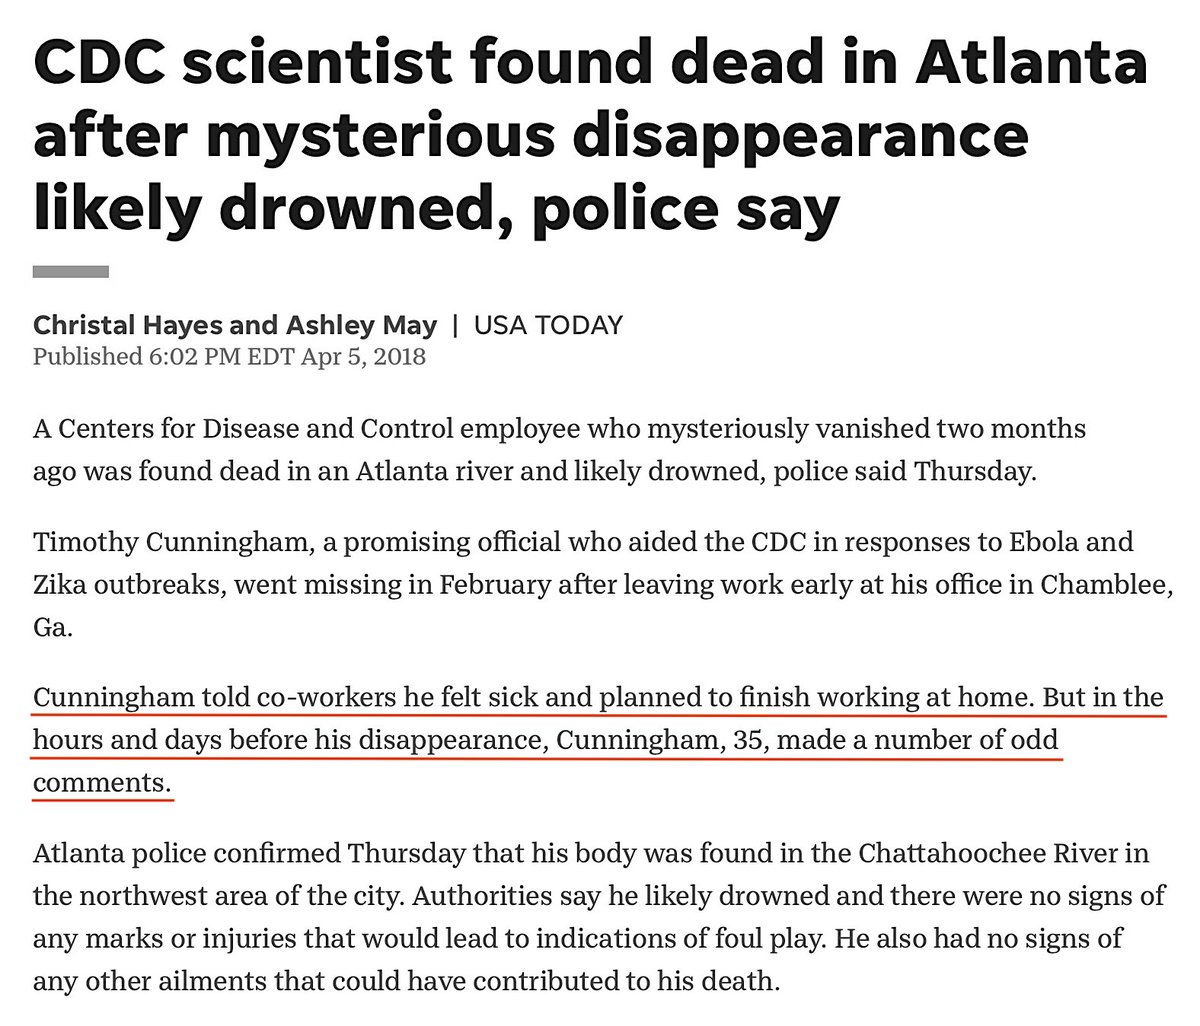 Timothy Cunningham's Body Was Found Partially Submerged In The Chattahoochee River In NorthWest Atlanta. The Fulton County Medical Examiner’s Office Identified The Body.April 5, 2018 https://eu.usatoday.com/story/news/2018/04/05/cdc-scientist-found-dead-atlanta-after-mysterious-disappearance-police-say/489845002/ #QAnon  #Vaccine  #VaccineDeepState  @potus